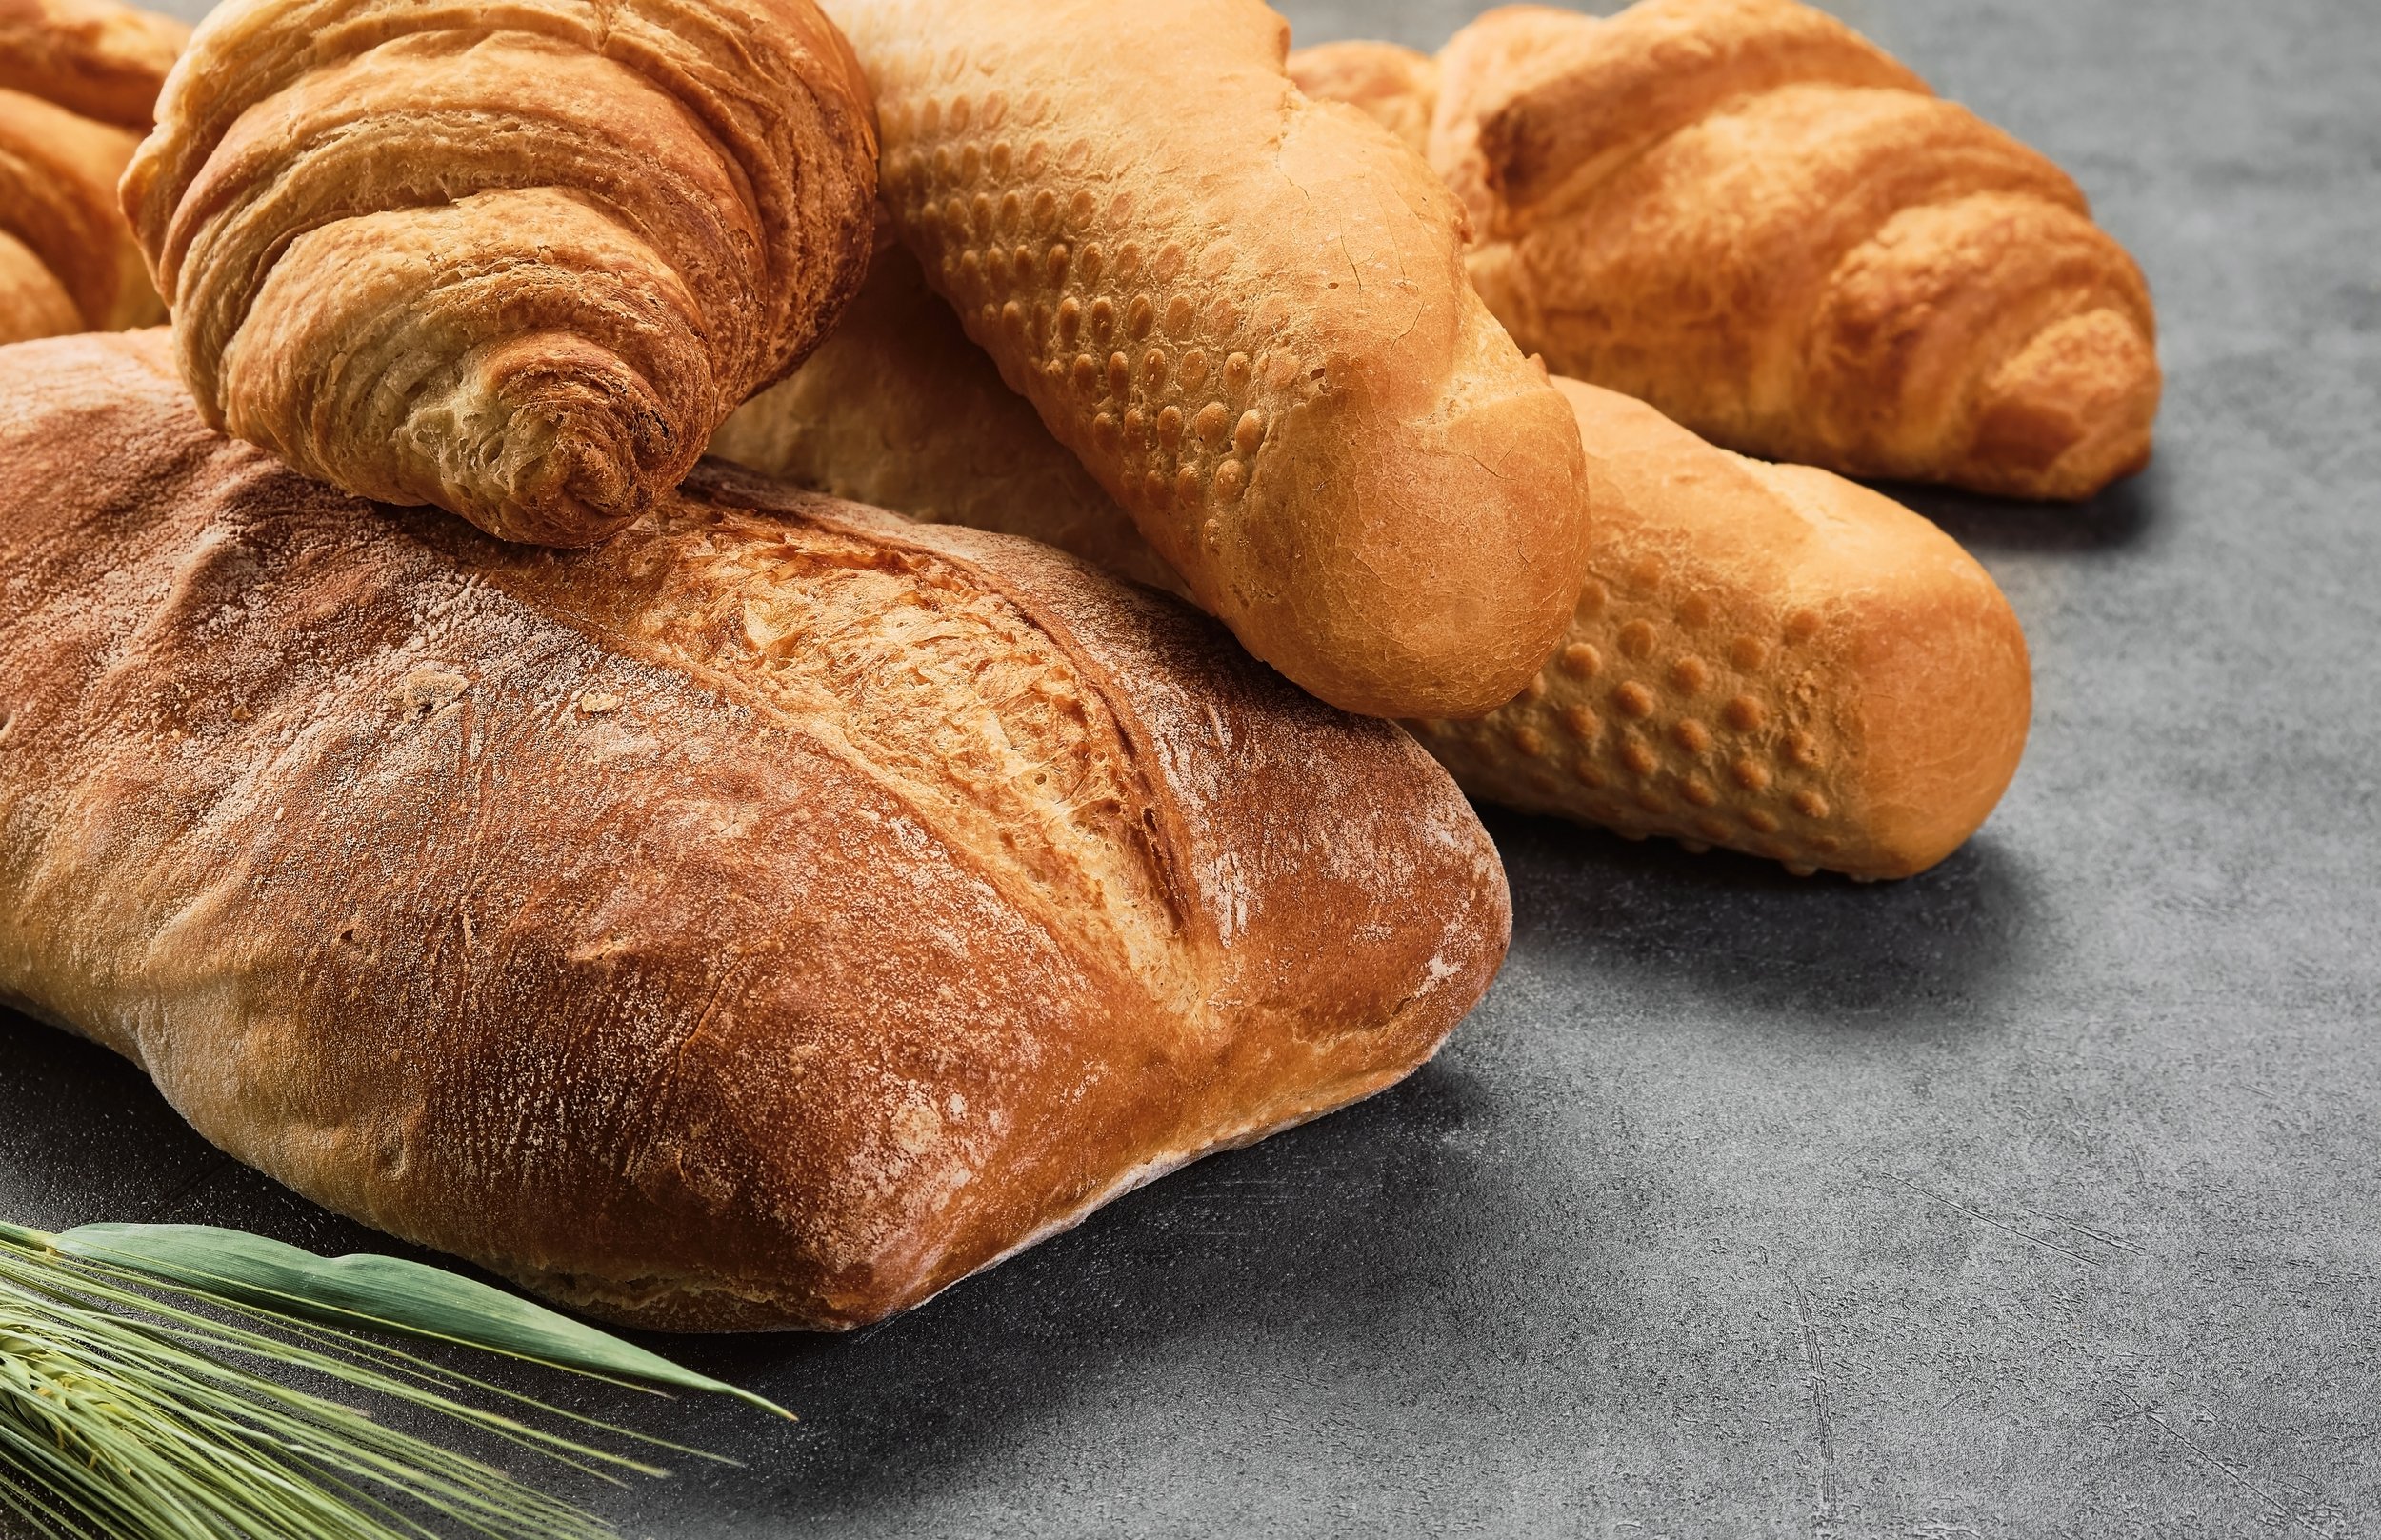 different-kinds-bread-rolls-gray-board-closeup-kitchen-poster-design-local-bakery-baguette-croissant-ciabatta-various-types-freshly-baked-bread.jpg